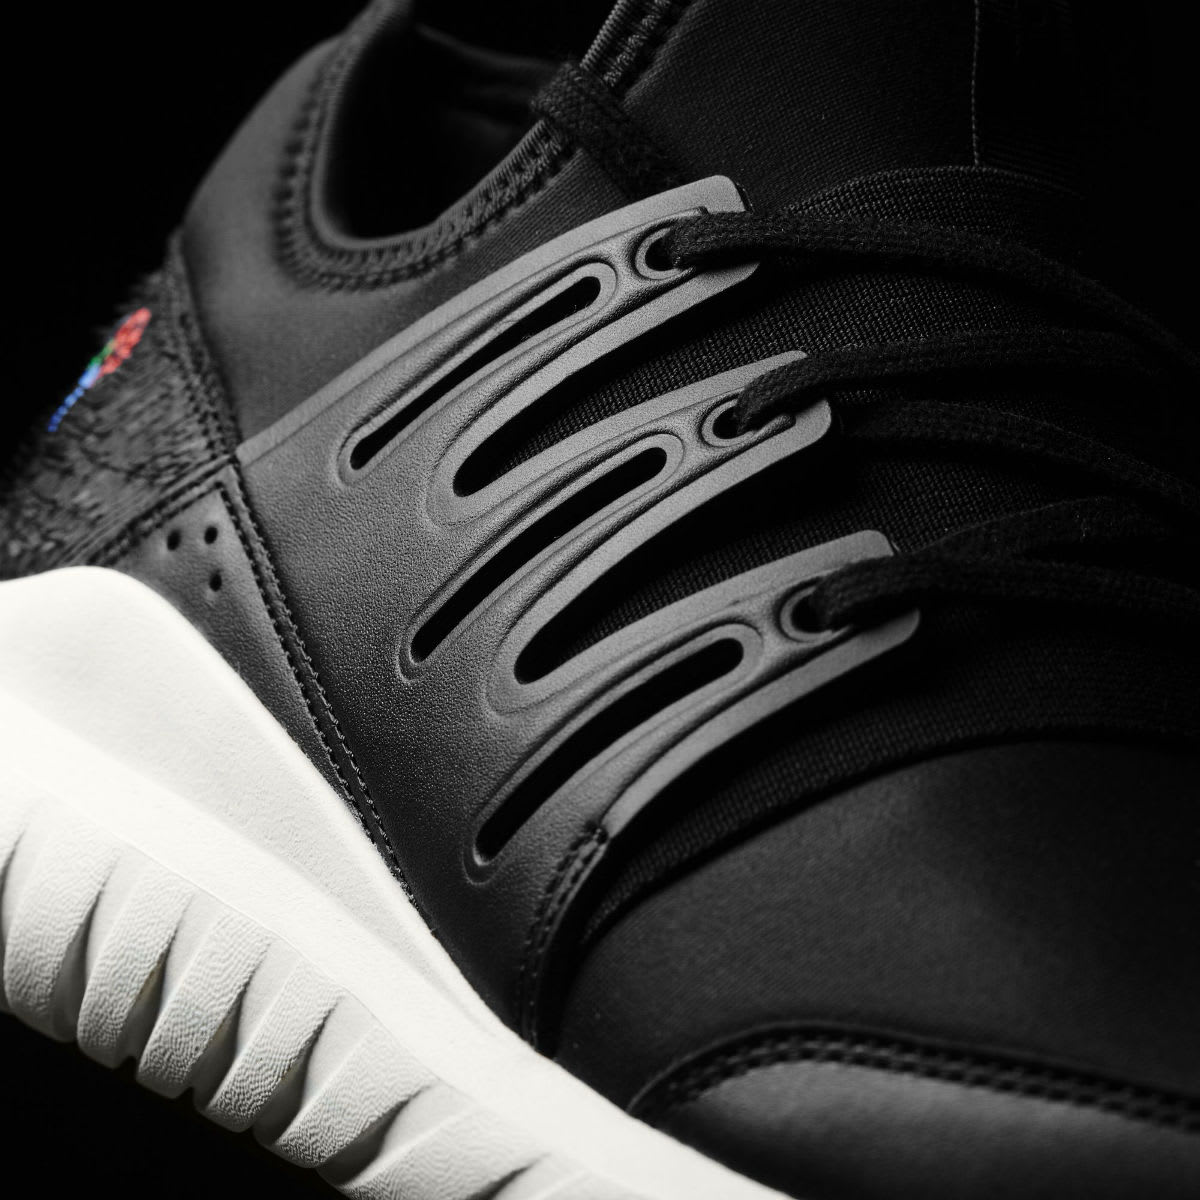 Adidas Tubular Radial CNY Year of the Rooster Release Date Cage BA7780